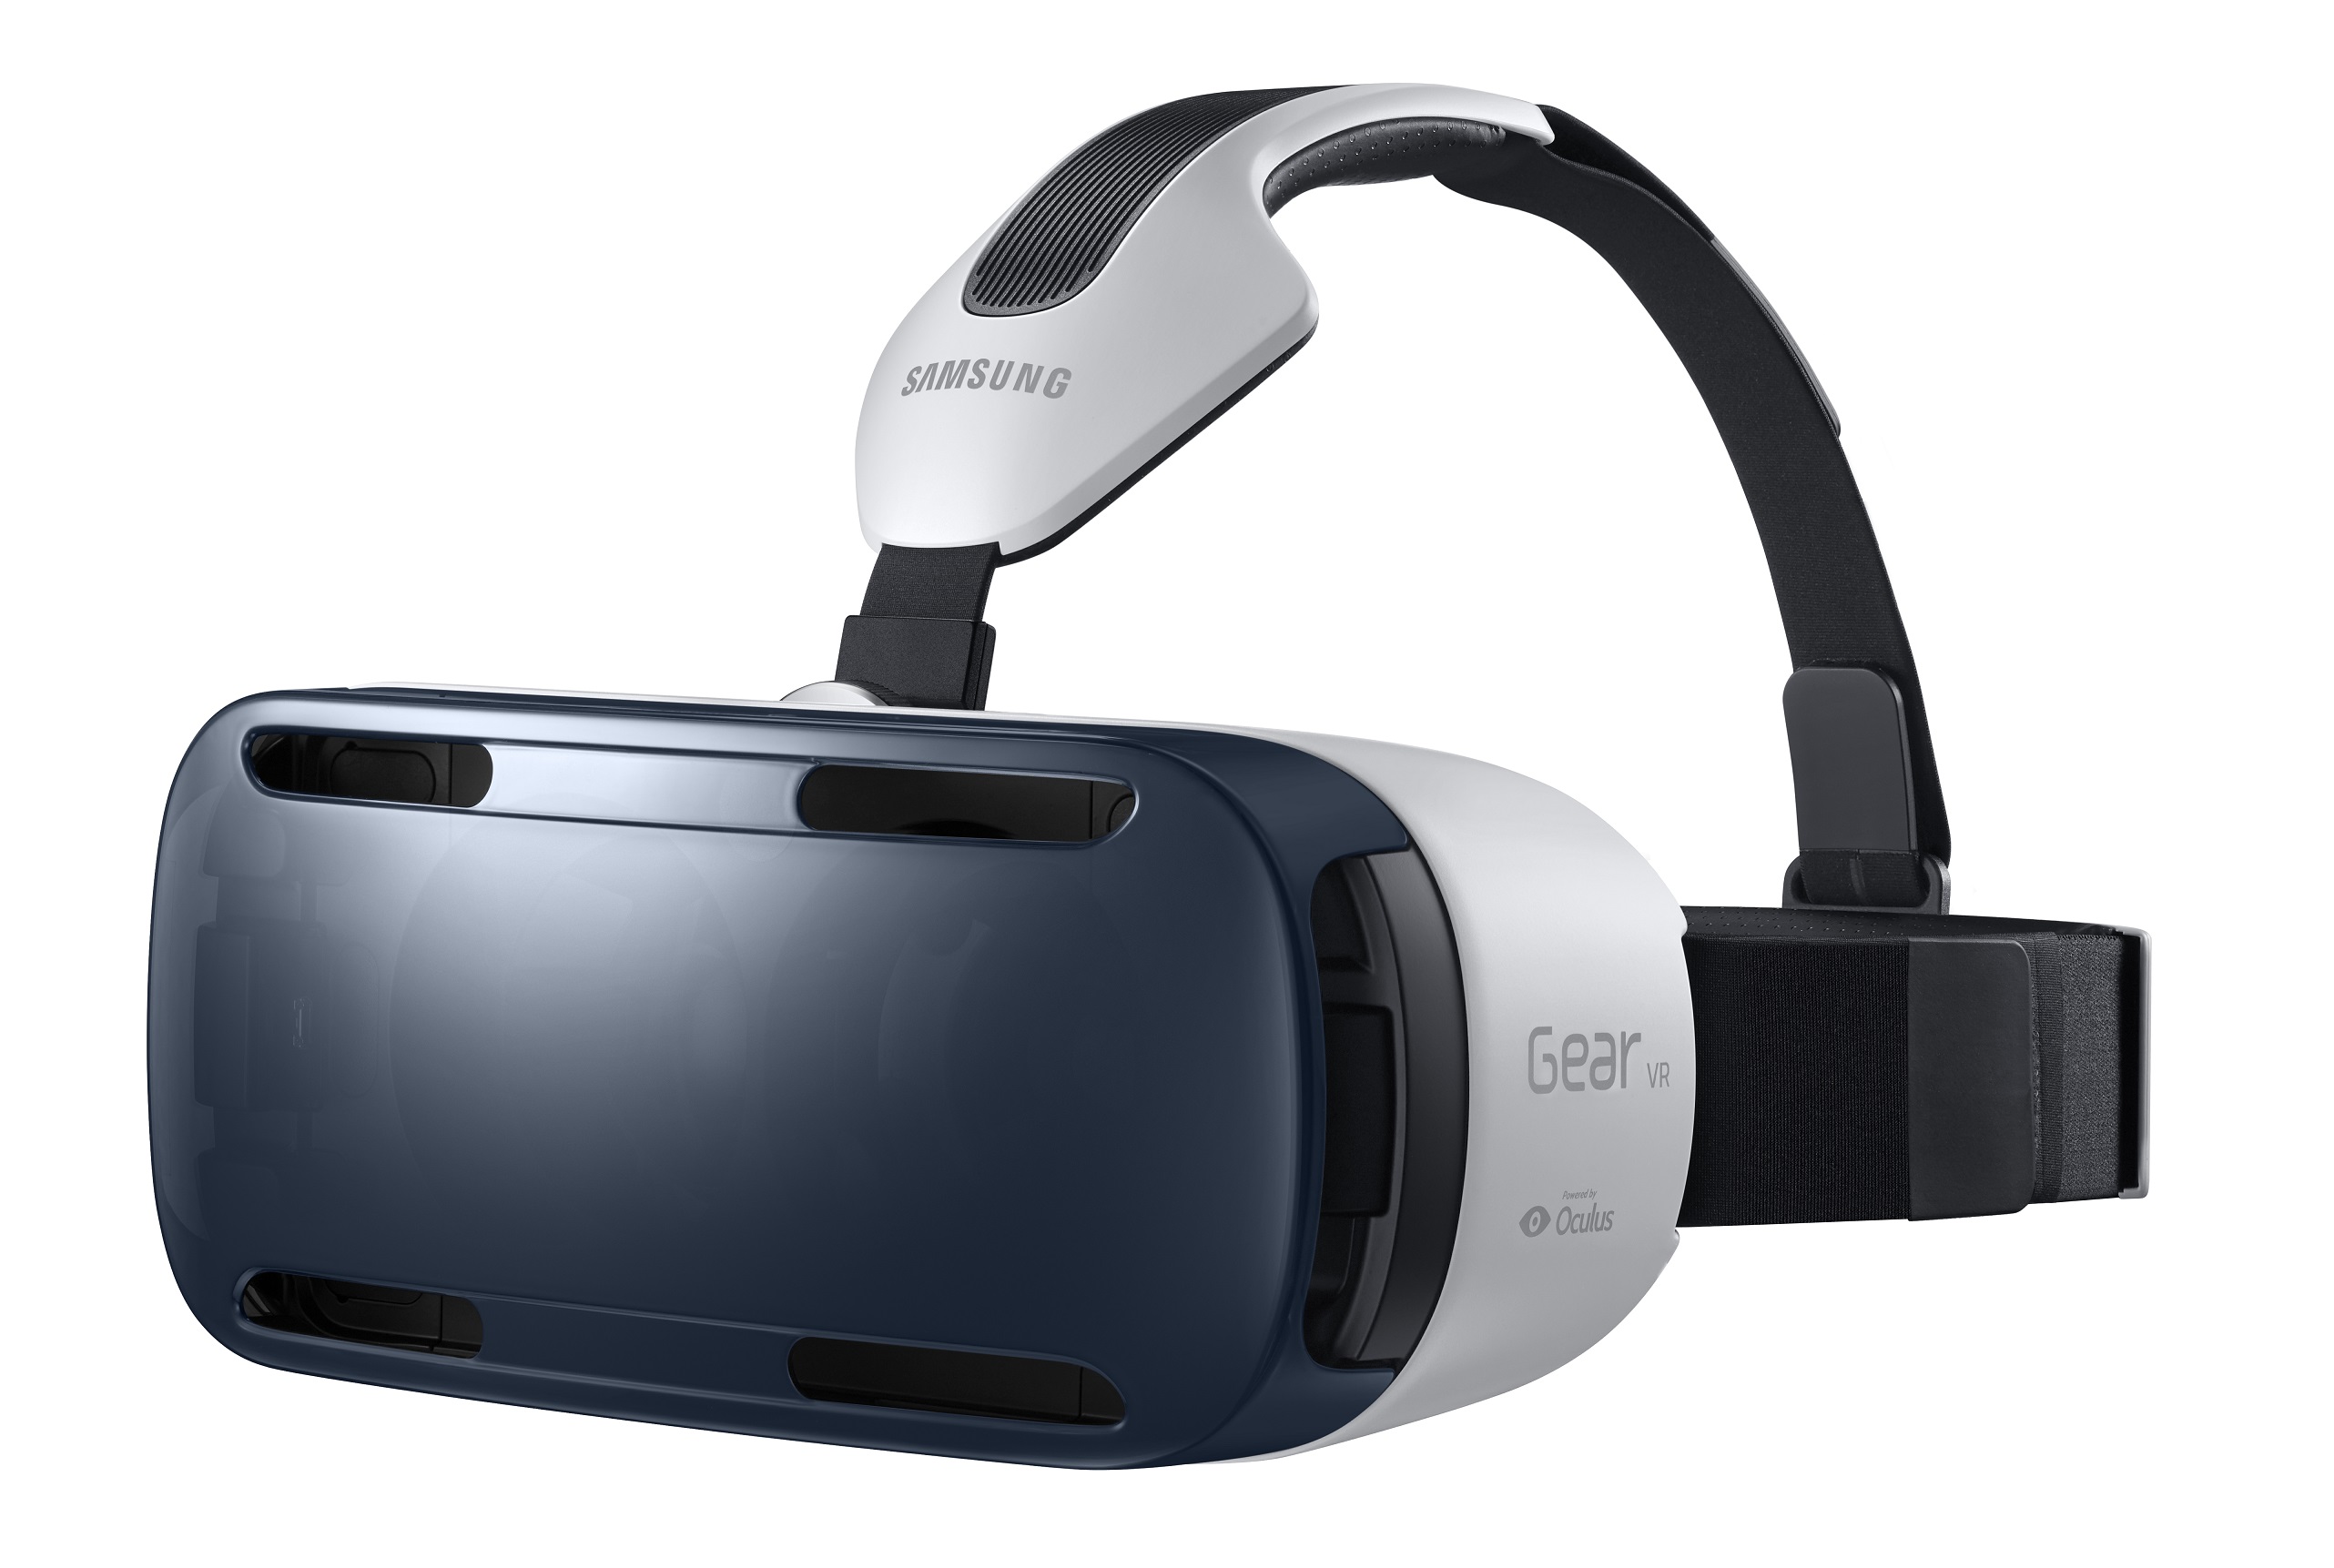 This new 3D version of the virtual model from samsung, gave me